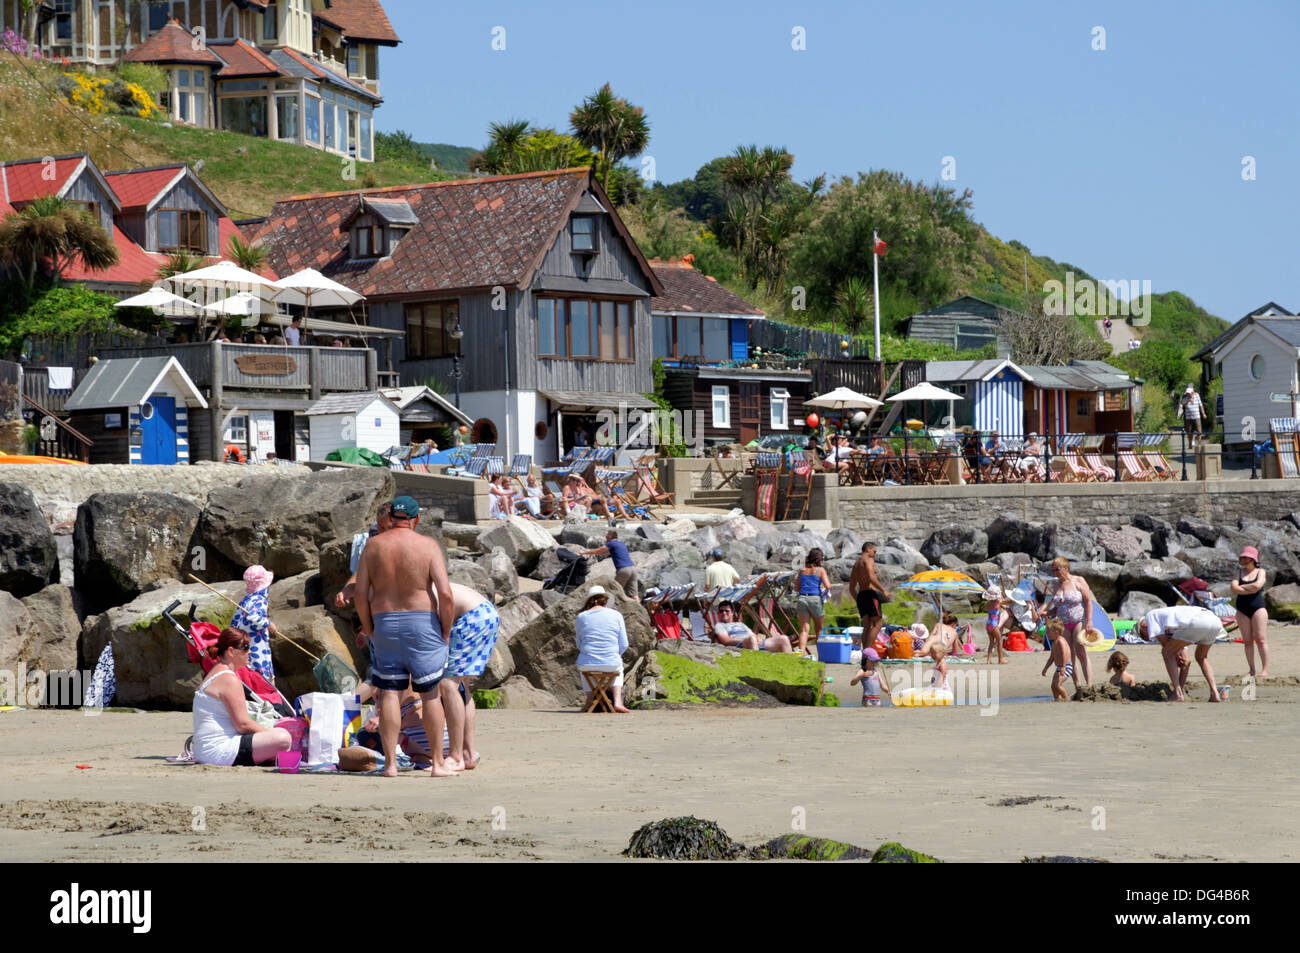 Family on Beach, Steephill Cove,Whitwell, Ventnor, Isle of Wight, England, UK. Stock Photo